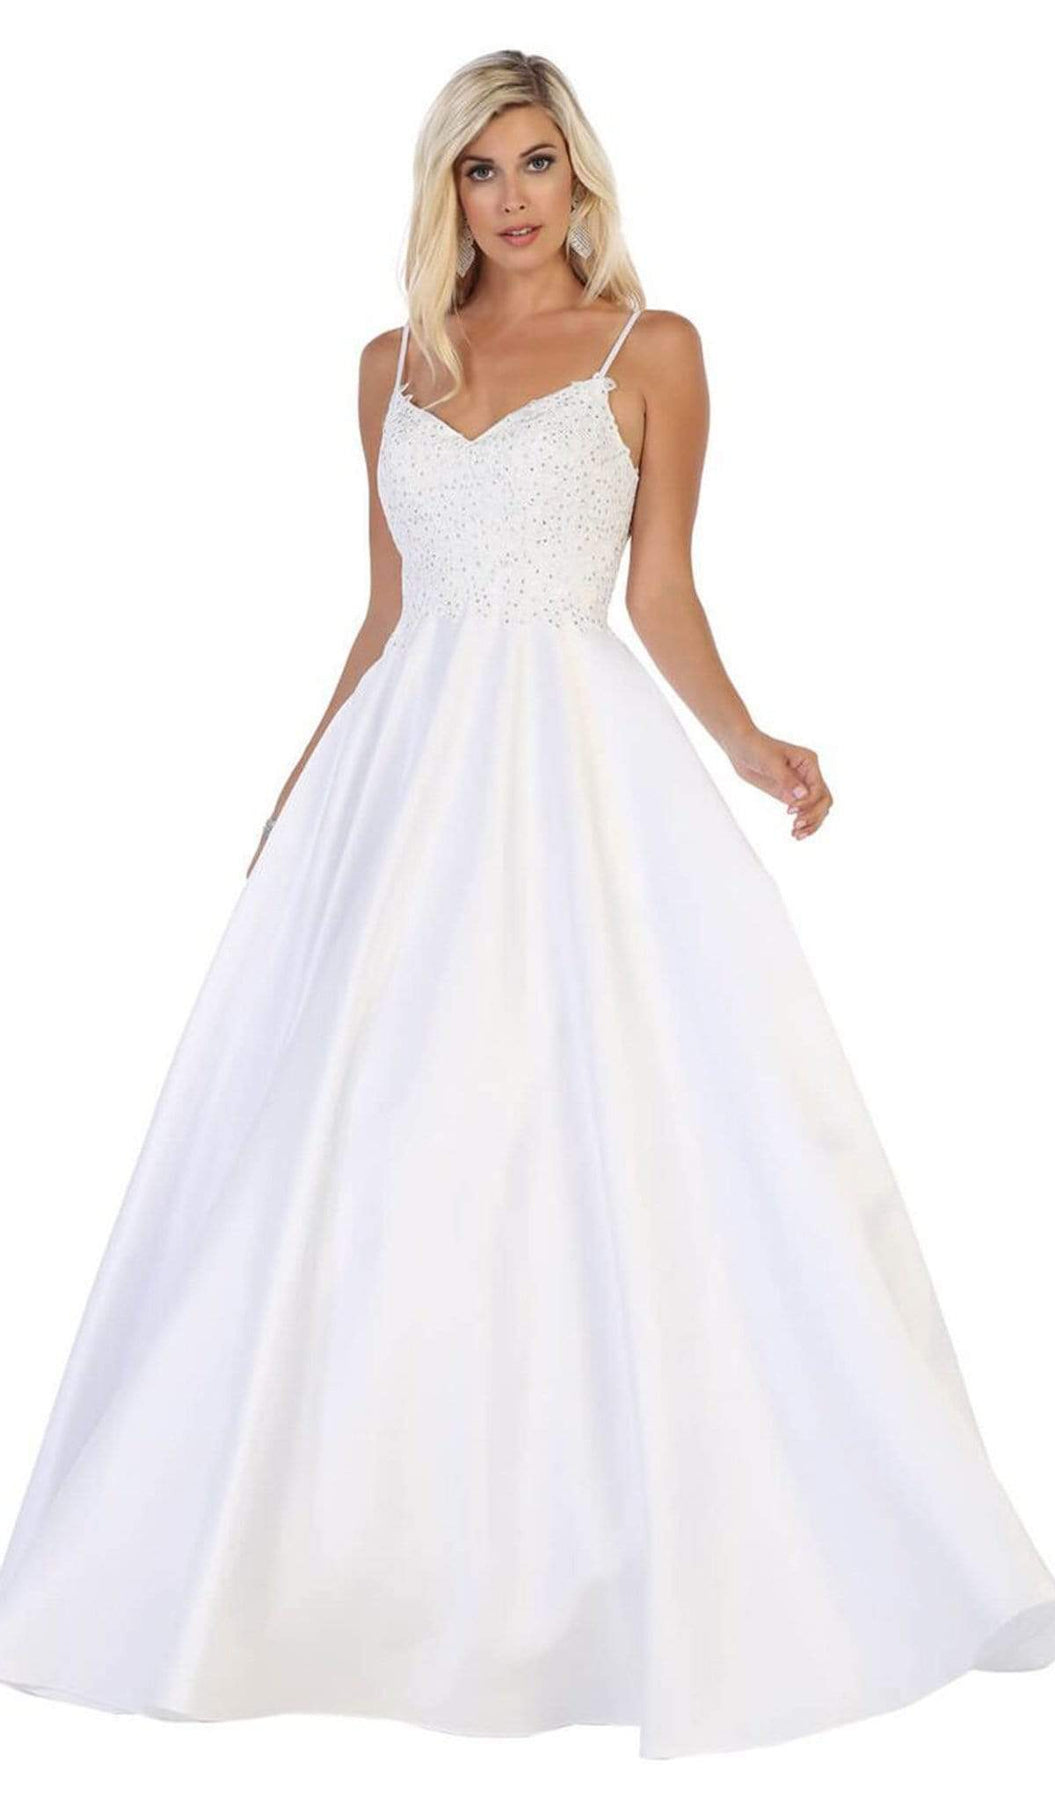 May Queen - MQ1685 Sleeveless Beaded Mesh Lace Back A-Line Satin Gown Bridesmaid Dresses 4 / White